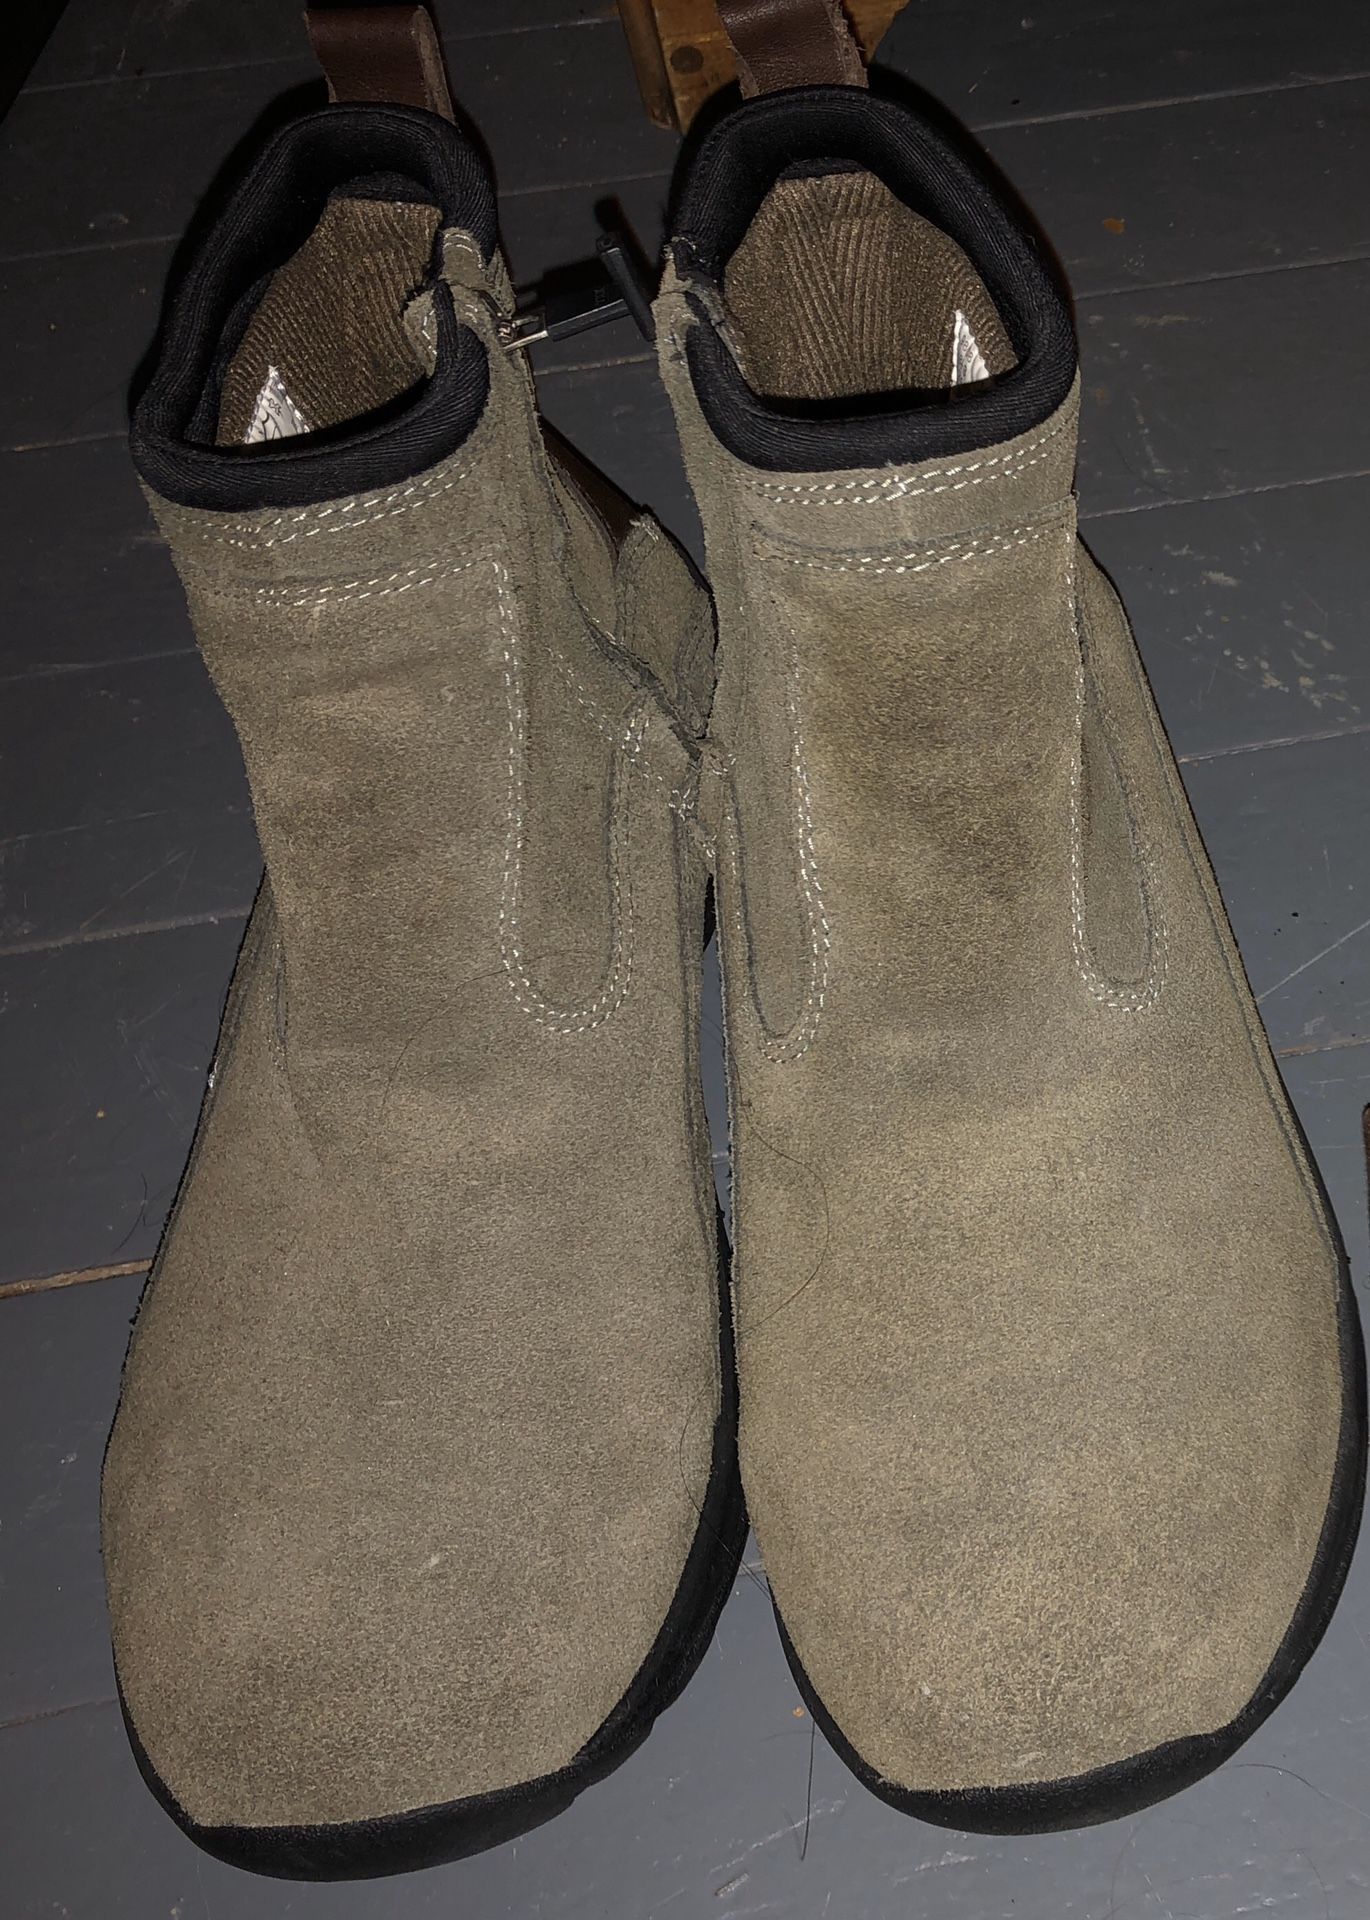 Women’s Size 8.5 Land’s End Leather Ankle Boots